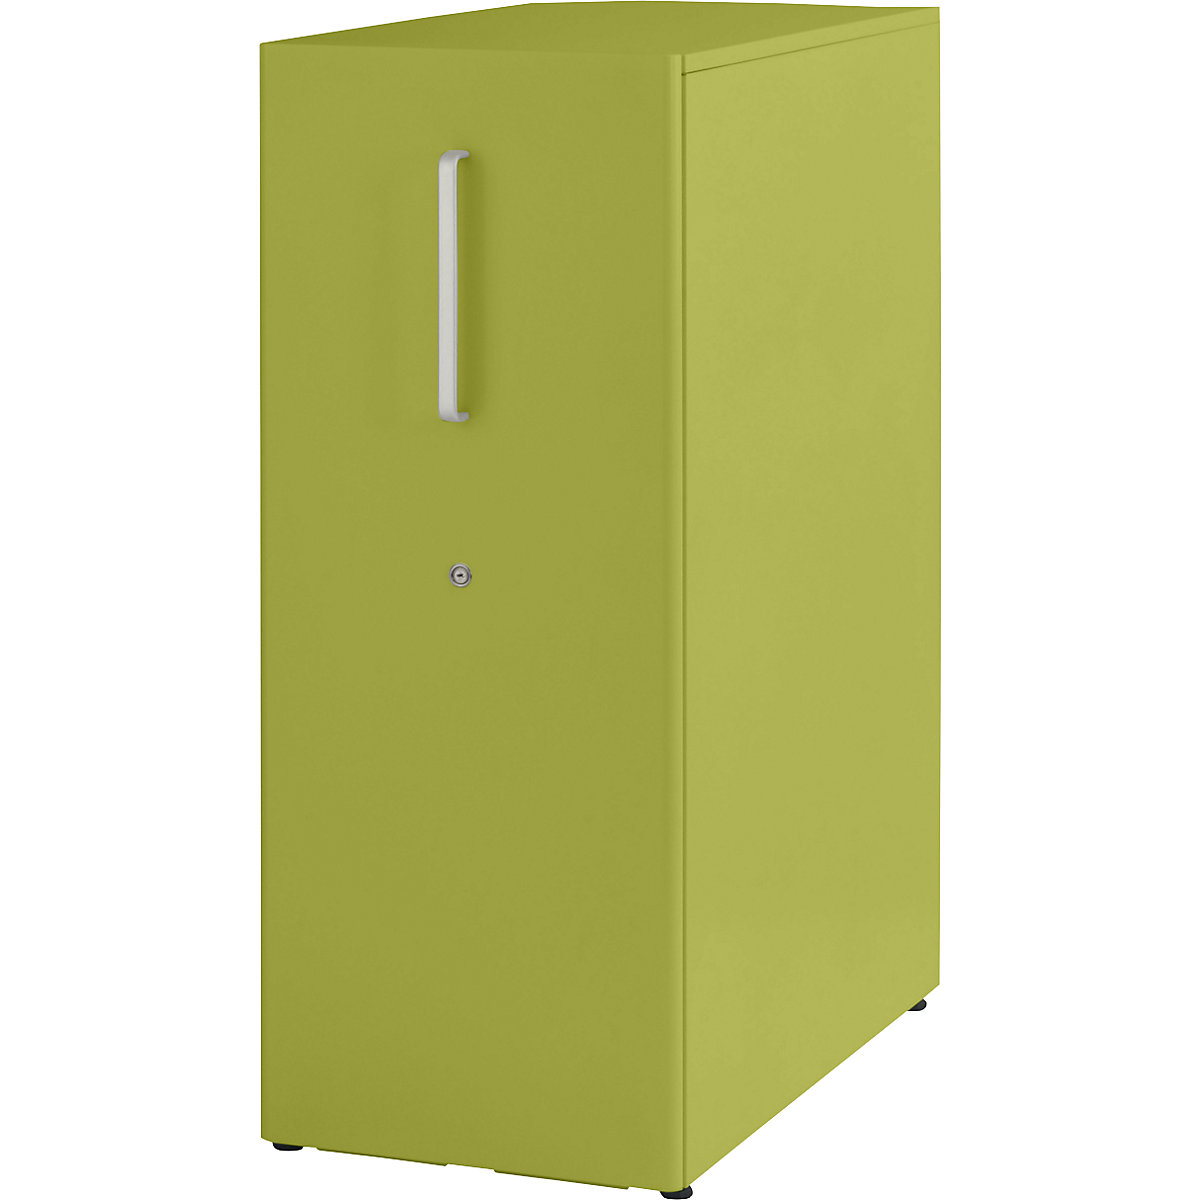 Tower™ 3 add-on furniture, with worktop – BISLEY, for the right side, 1 shelf, green-23